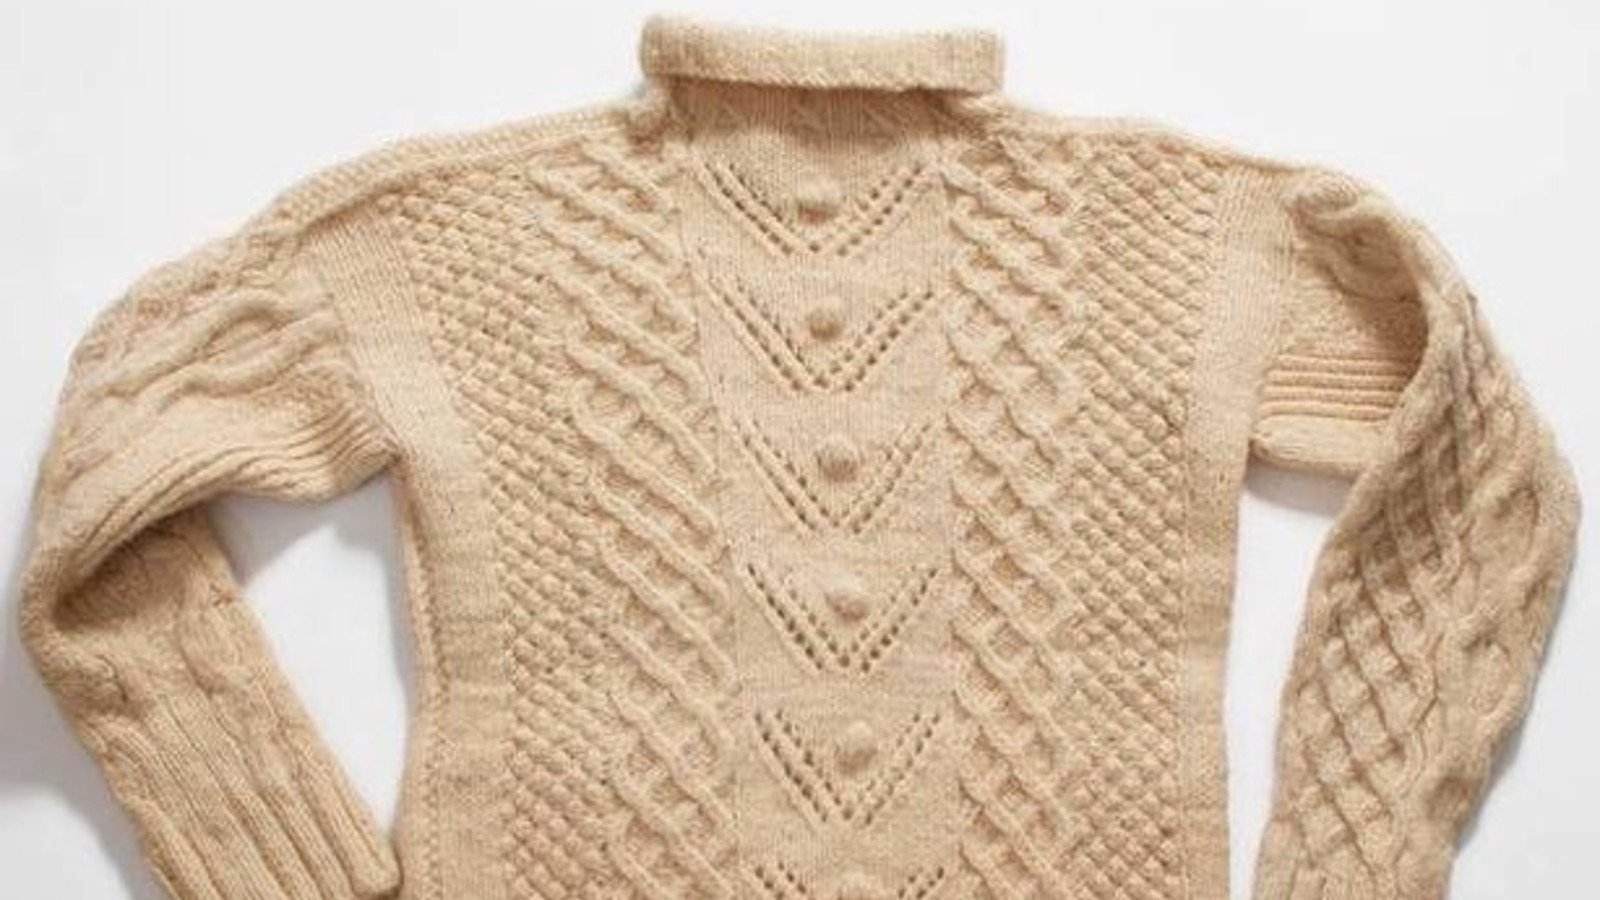 The popularity of the Aran jumper